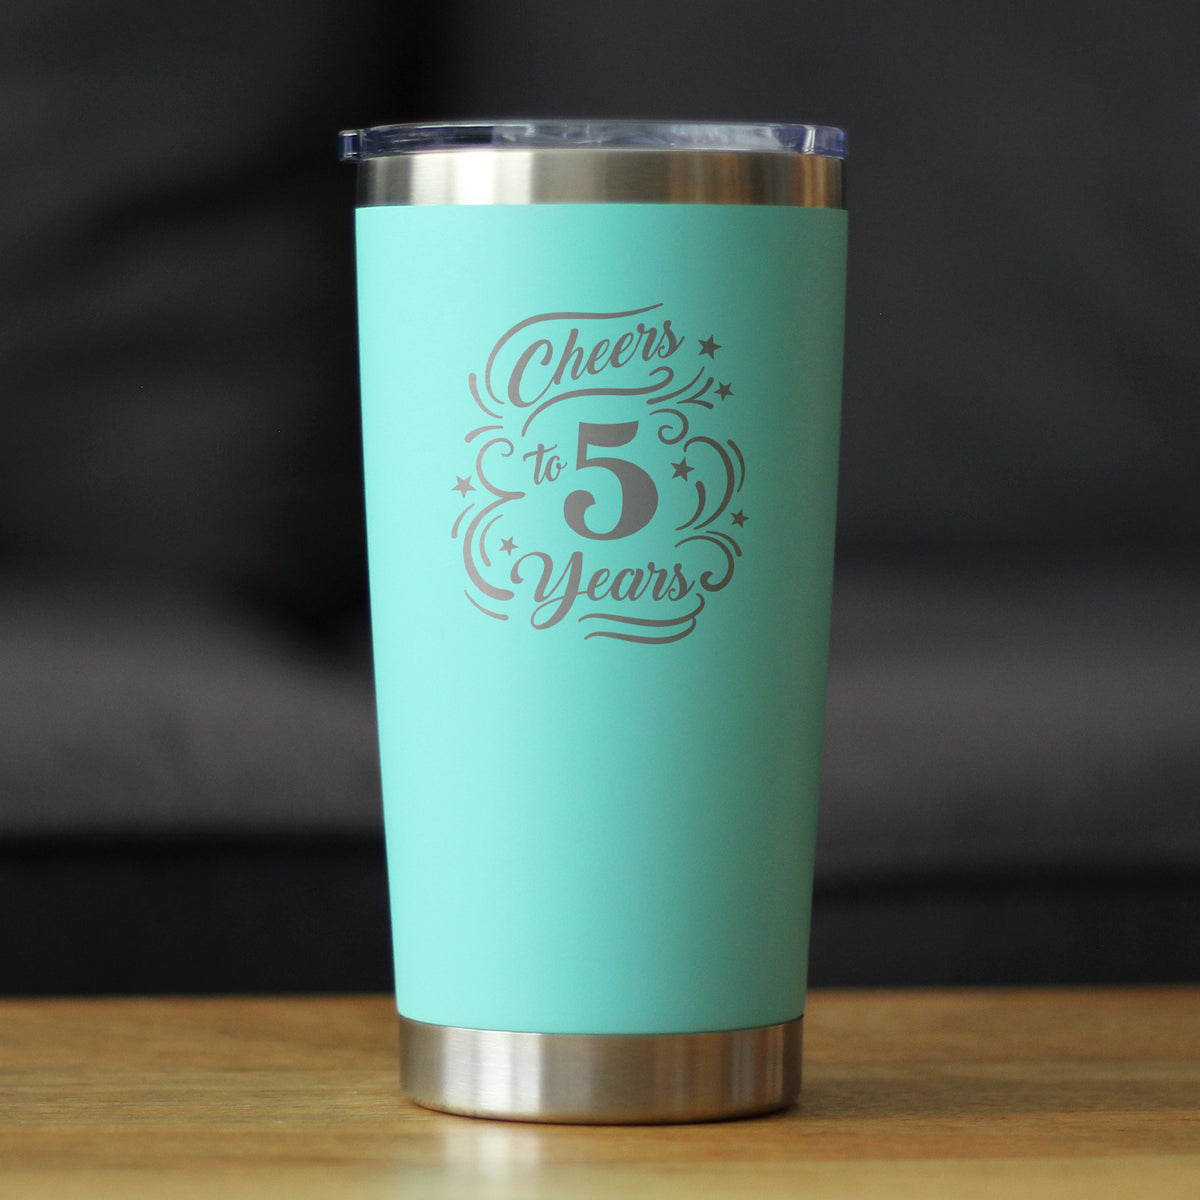 Cheers to 5 Years - Insulated Coffee Tumbler Cup with Sliding Lid - Stainless Steel Insulated Mug - 5th Anniversary Gifts and Party Decor